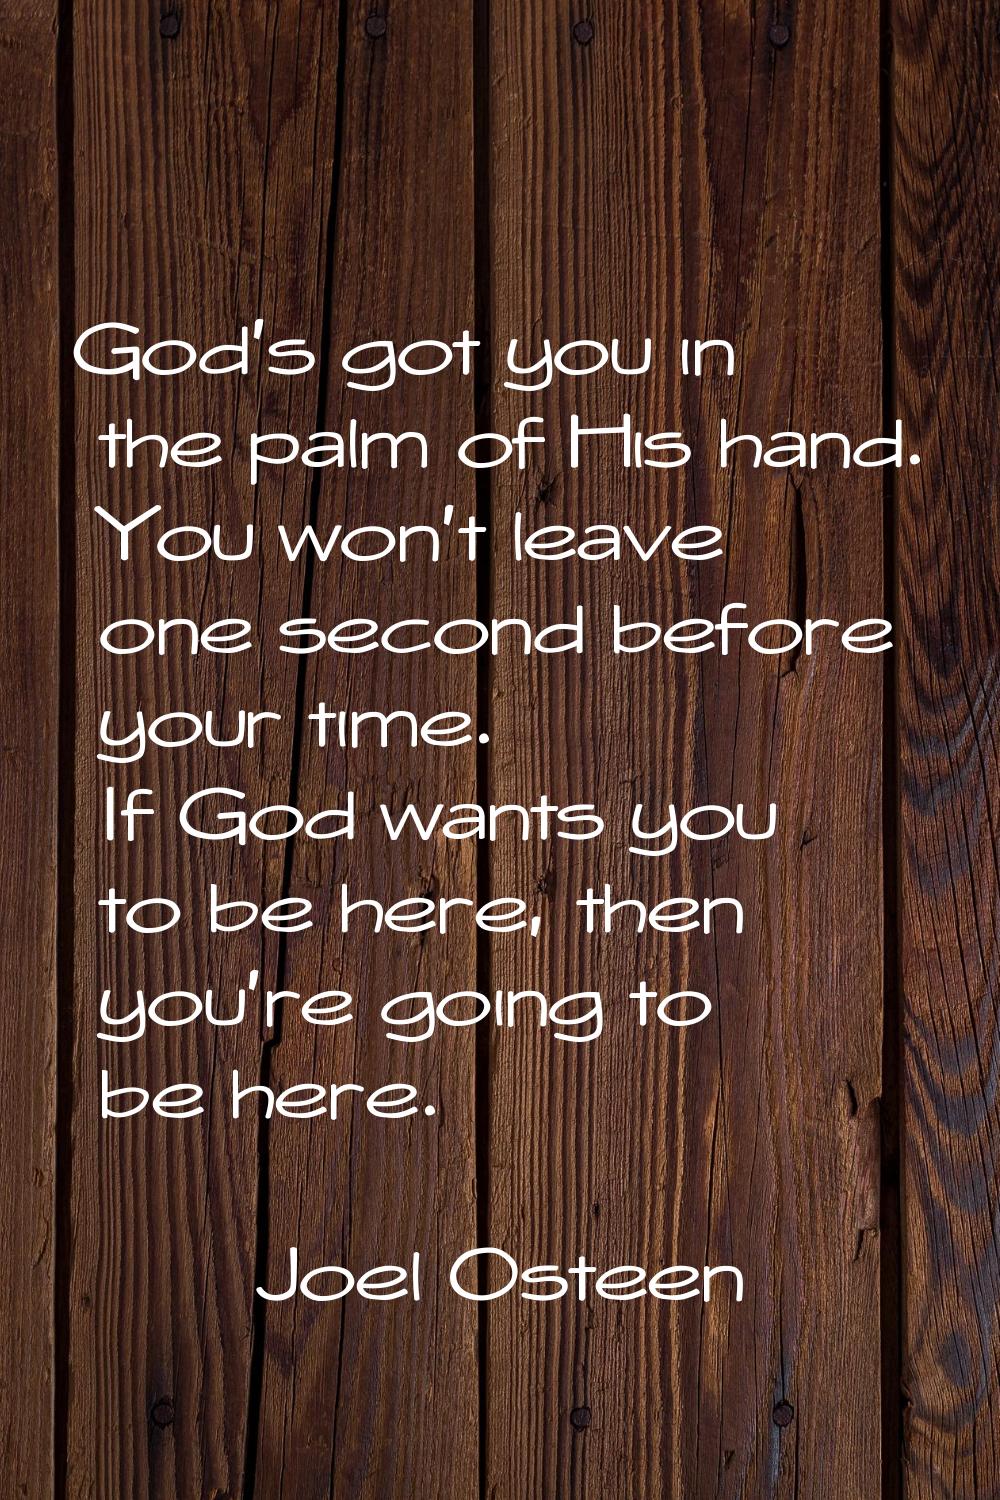 God's got you in the palm of His hand. You won't leave one second before your time. If God wants yo